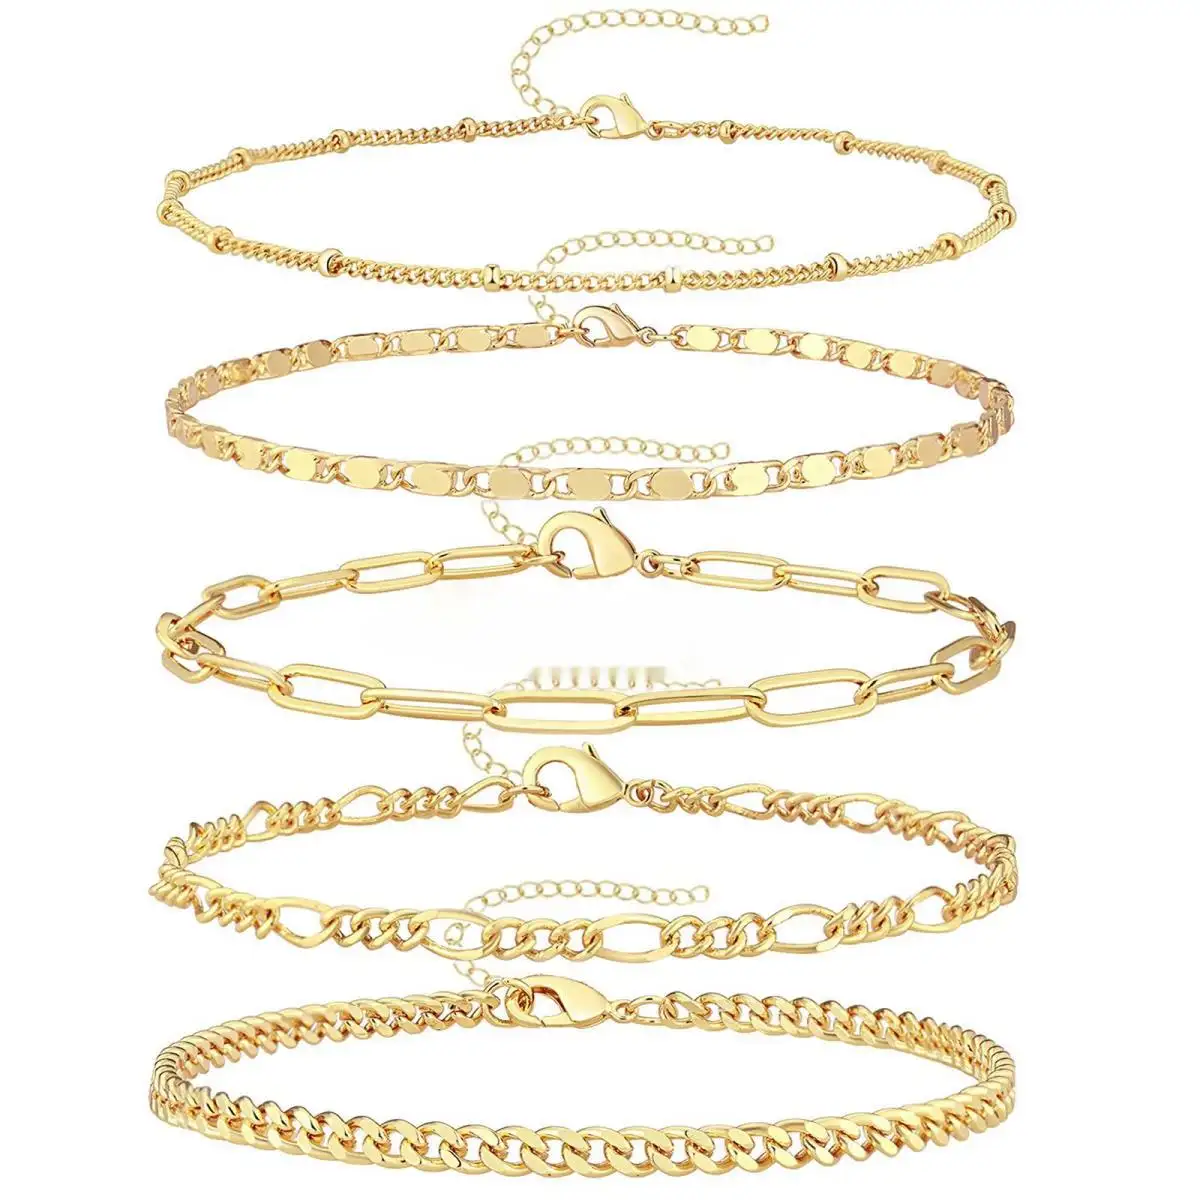 Hot Sale Gold Chain Adjustable Bracelets Set 14K 18k Real Gold Plated Link Chain Stackable Bracelets for Women Jewelry Gifts